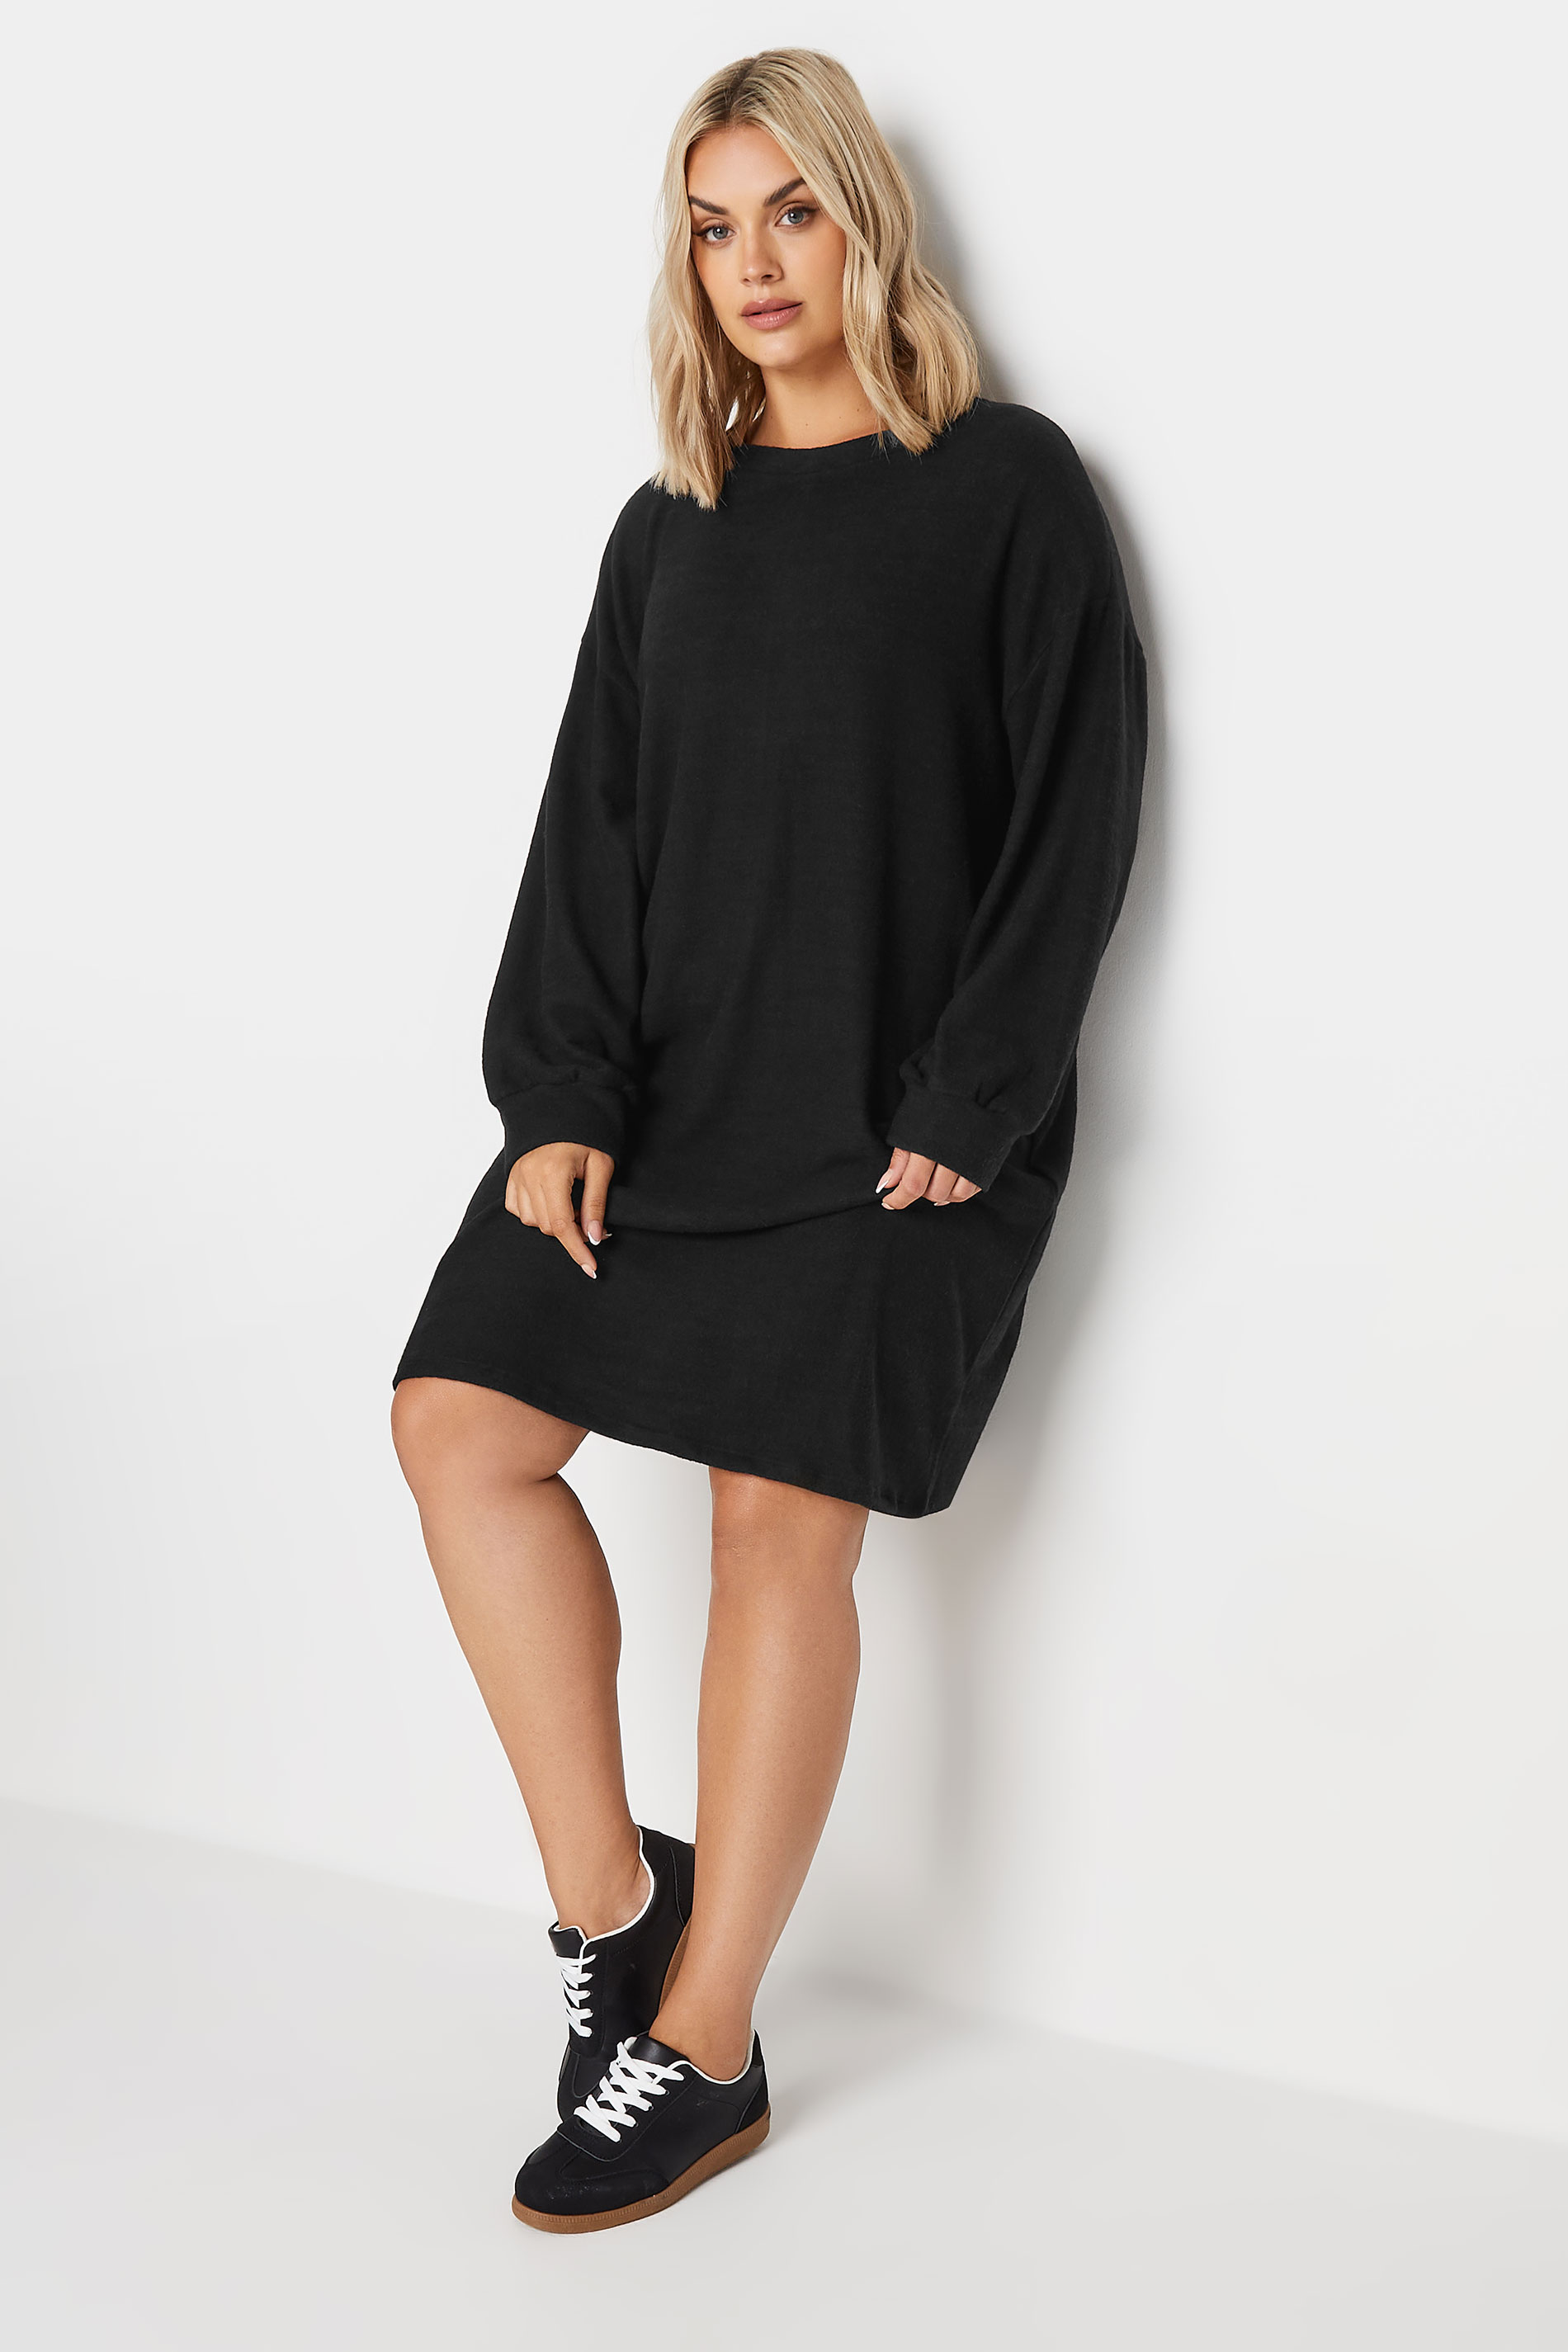 YOURS Plus Size Black Soft Touch Knitted Jumper Dress | Yours Clothing 2